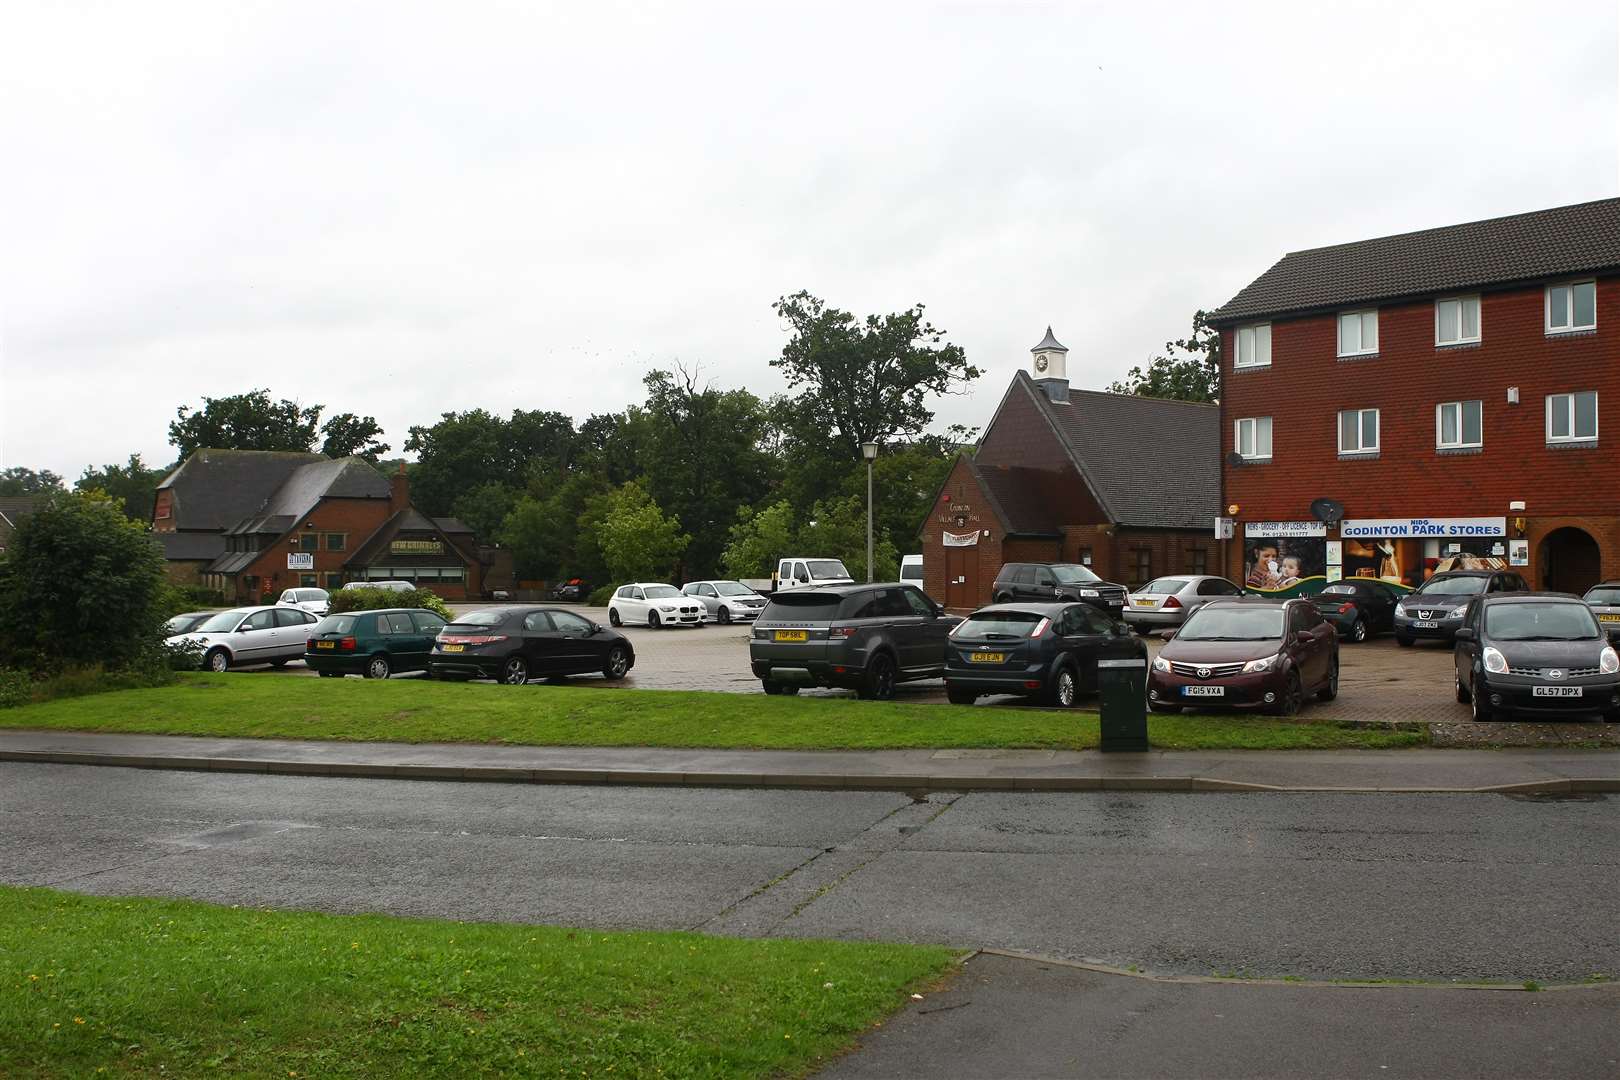 A new food store is being planned for the car park in Godinton Park